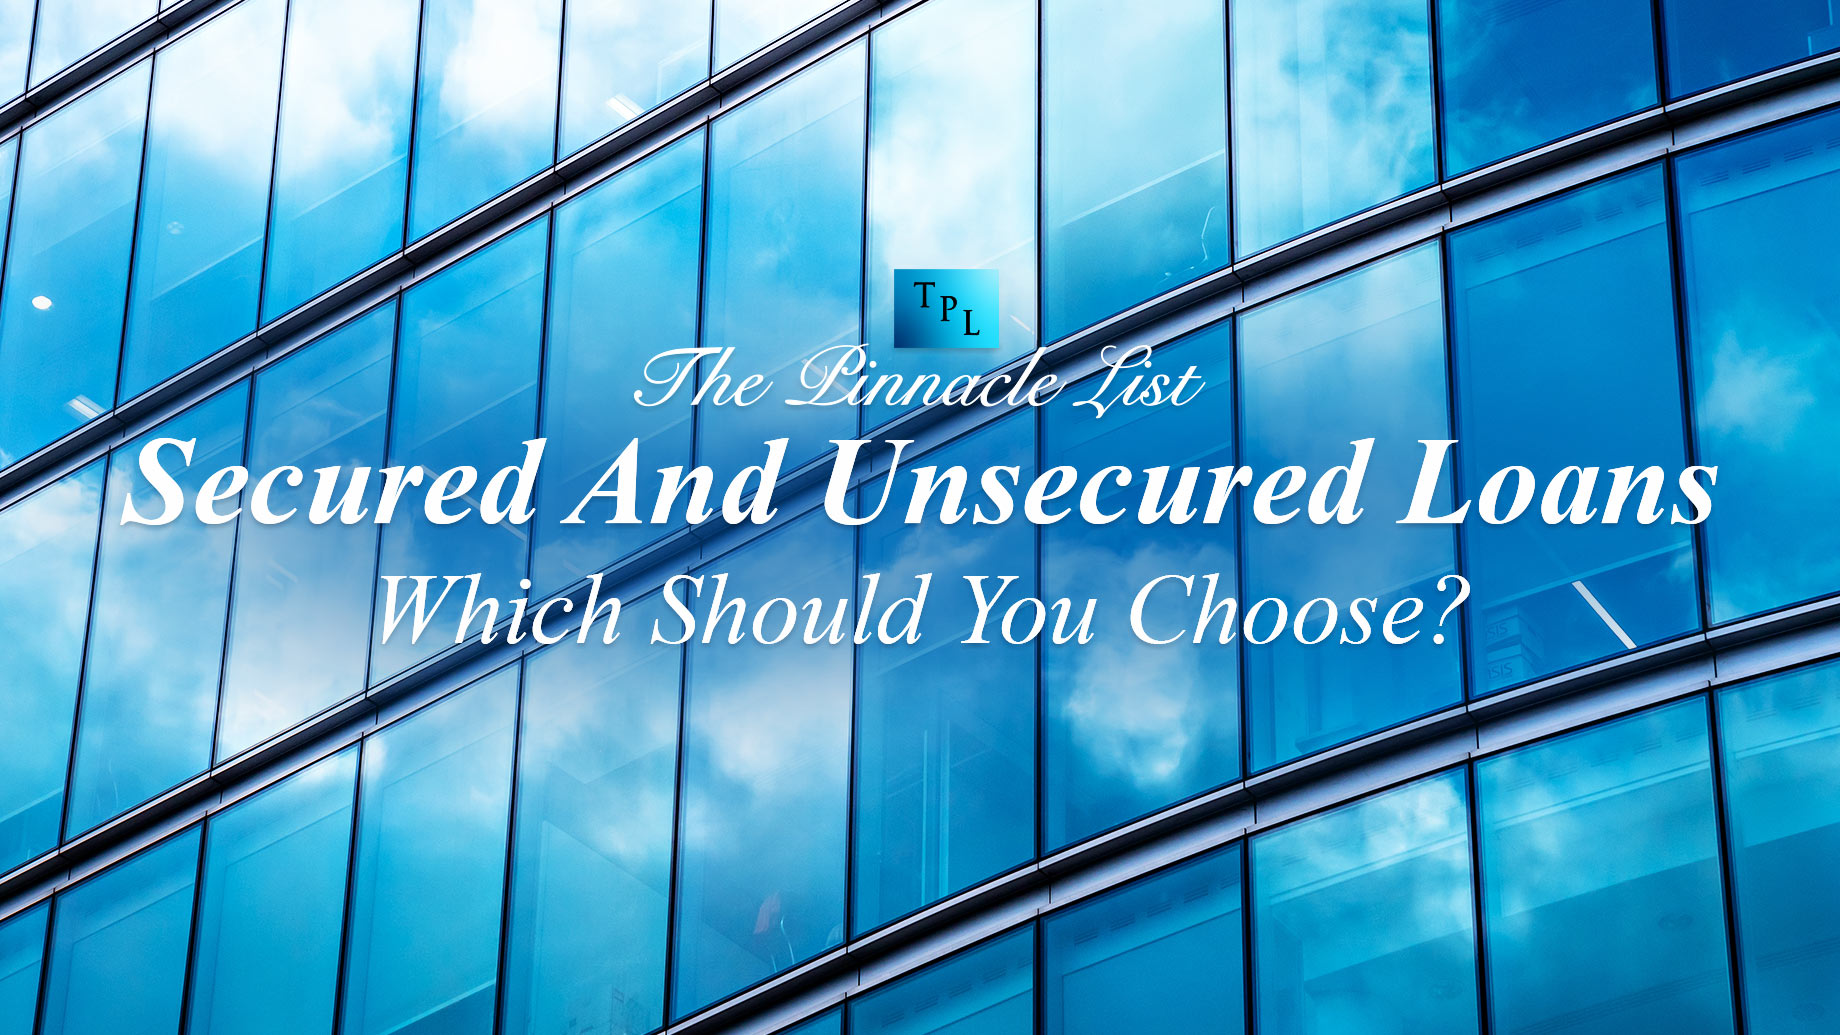 Secured And Unsecured Loans - Which Should You Choose?